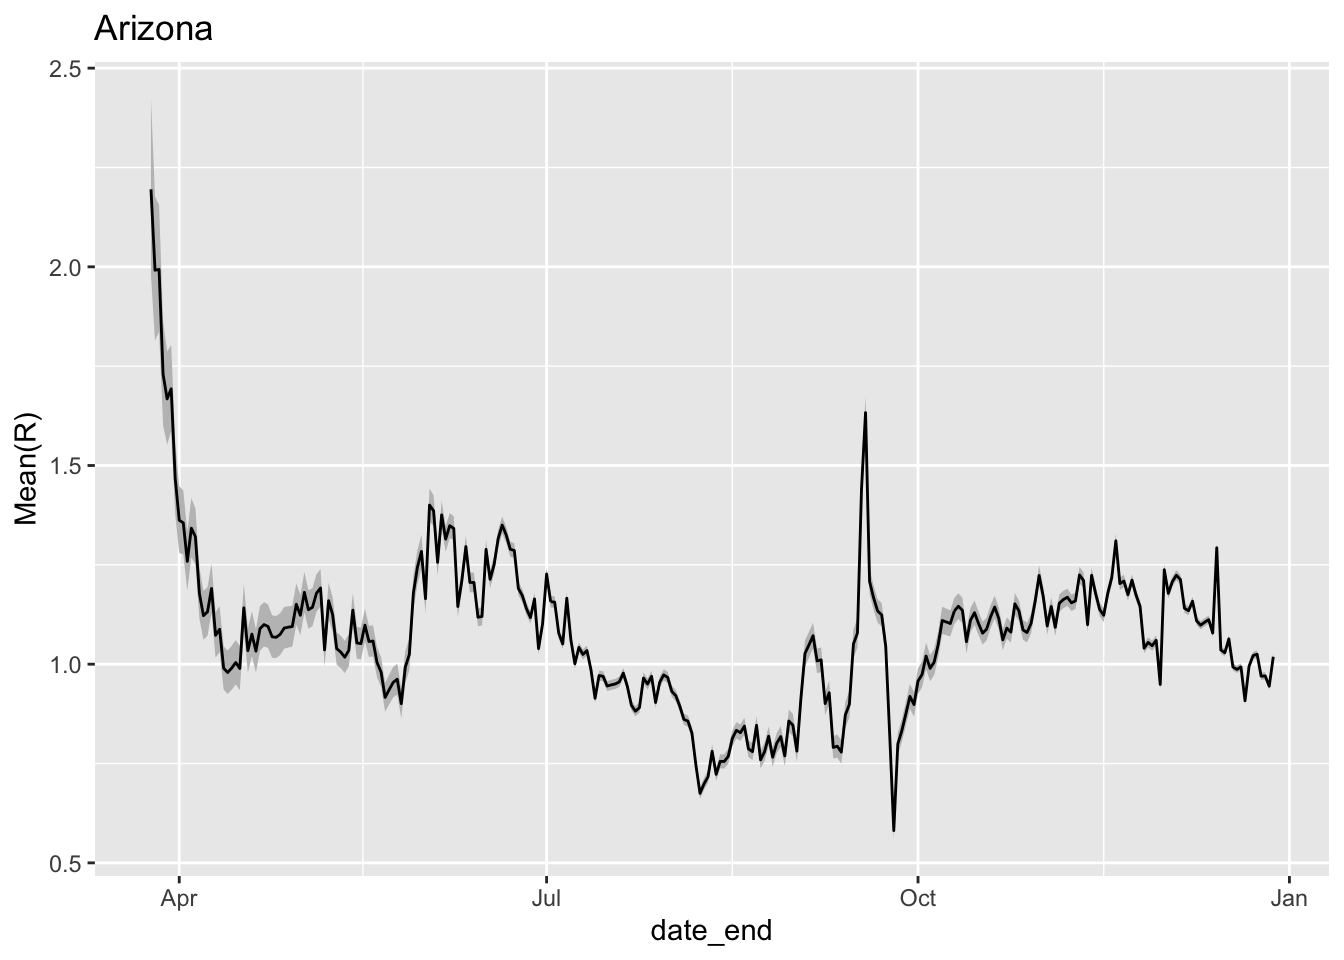 Estimate of R_0 over time for Arizona. The grey coloring represents 95% confidence intervals around the estimate of R_0.